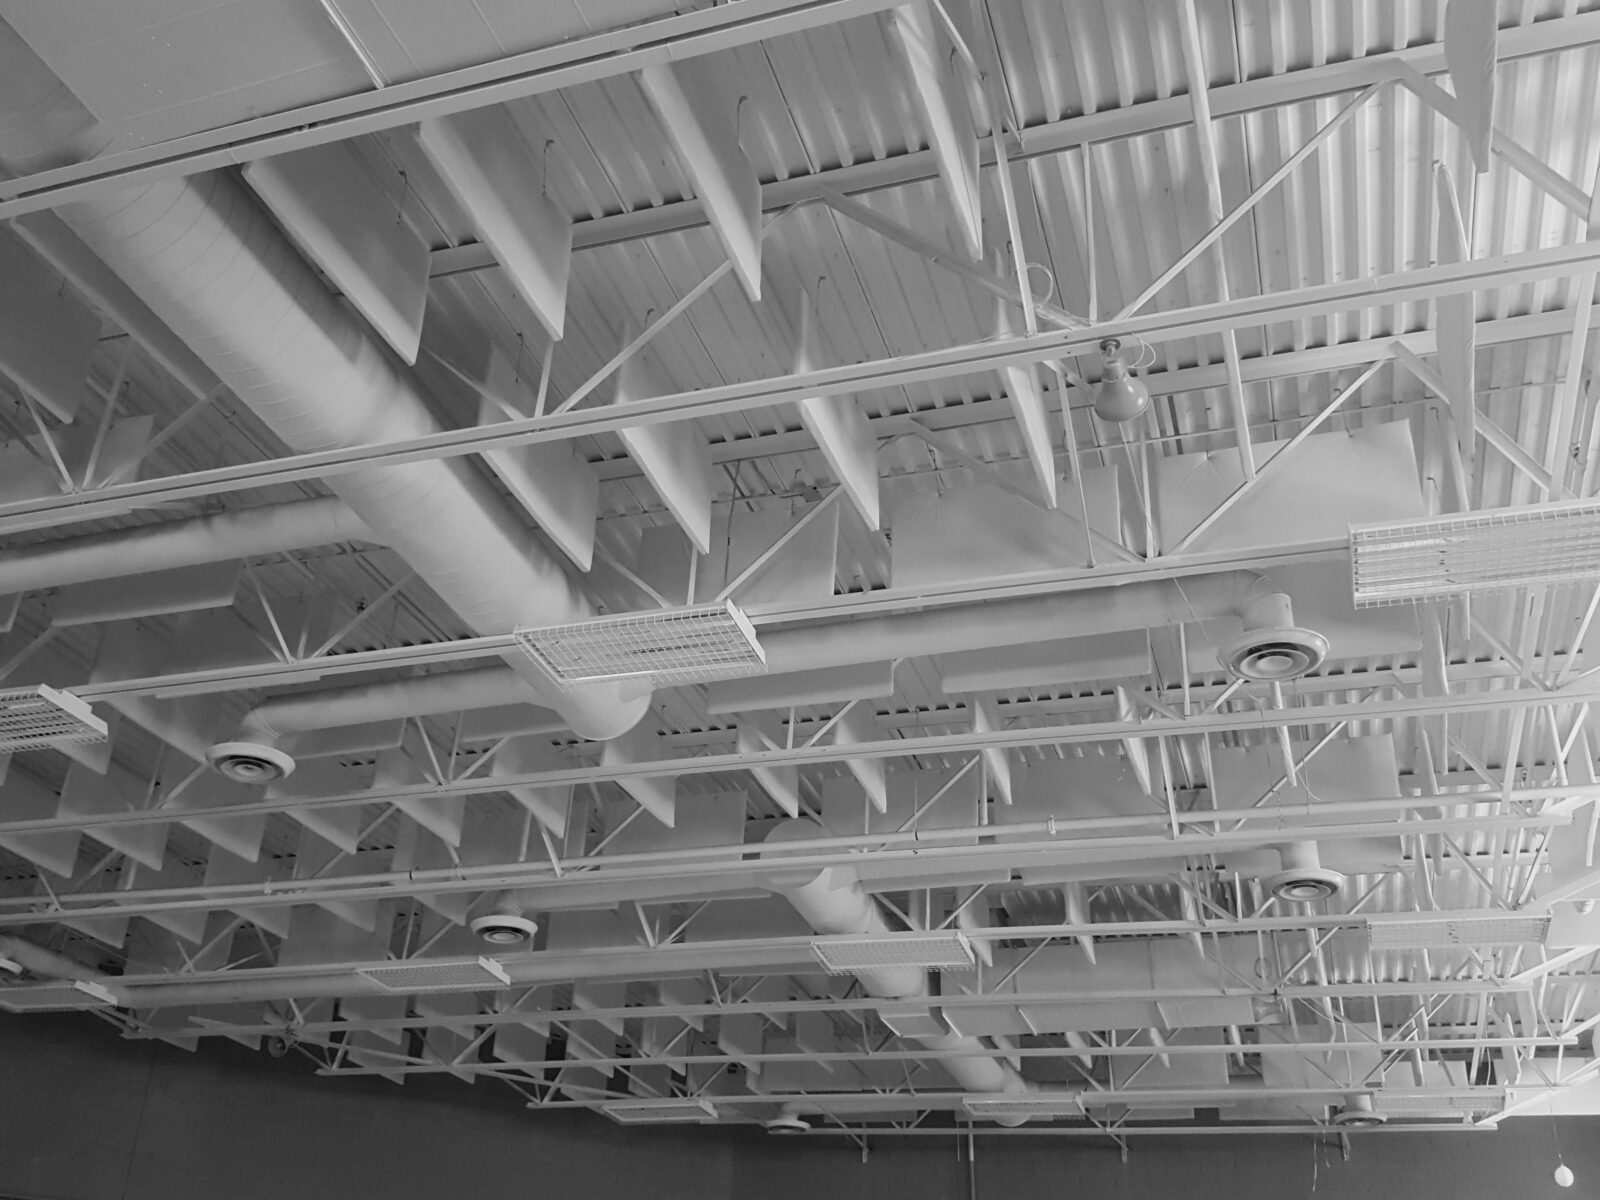 acoustic sound baffles in a metal deck ceiling